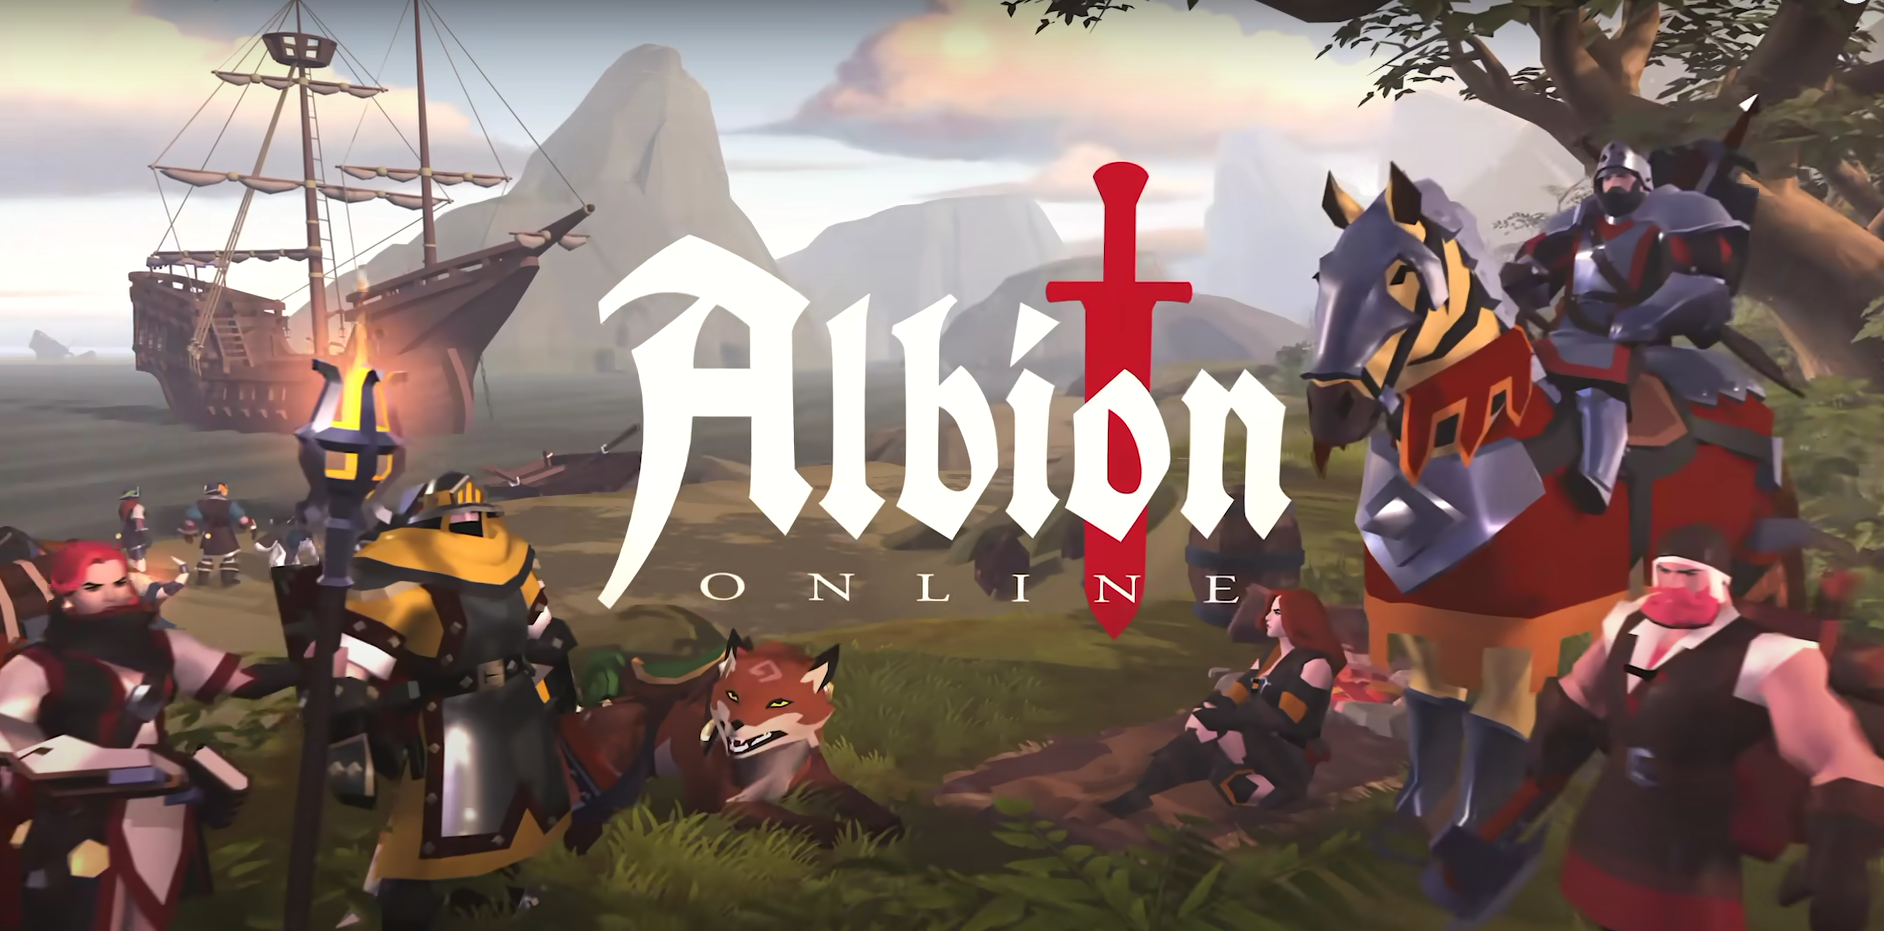 Albion Online Is Now Available To Play on PC and Mobile in Europe!